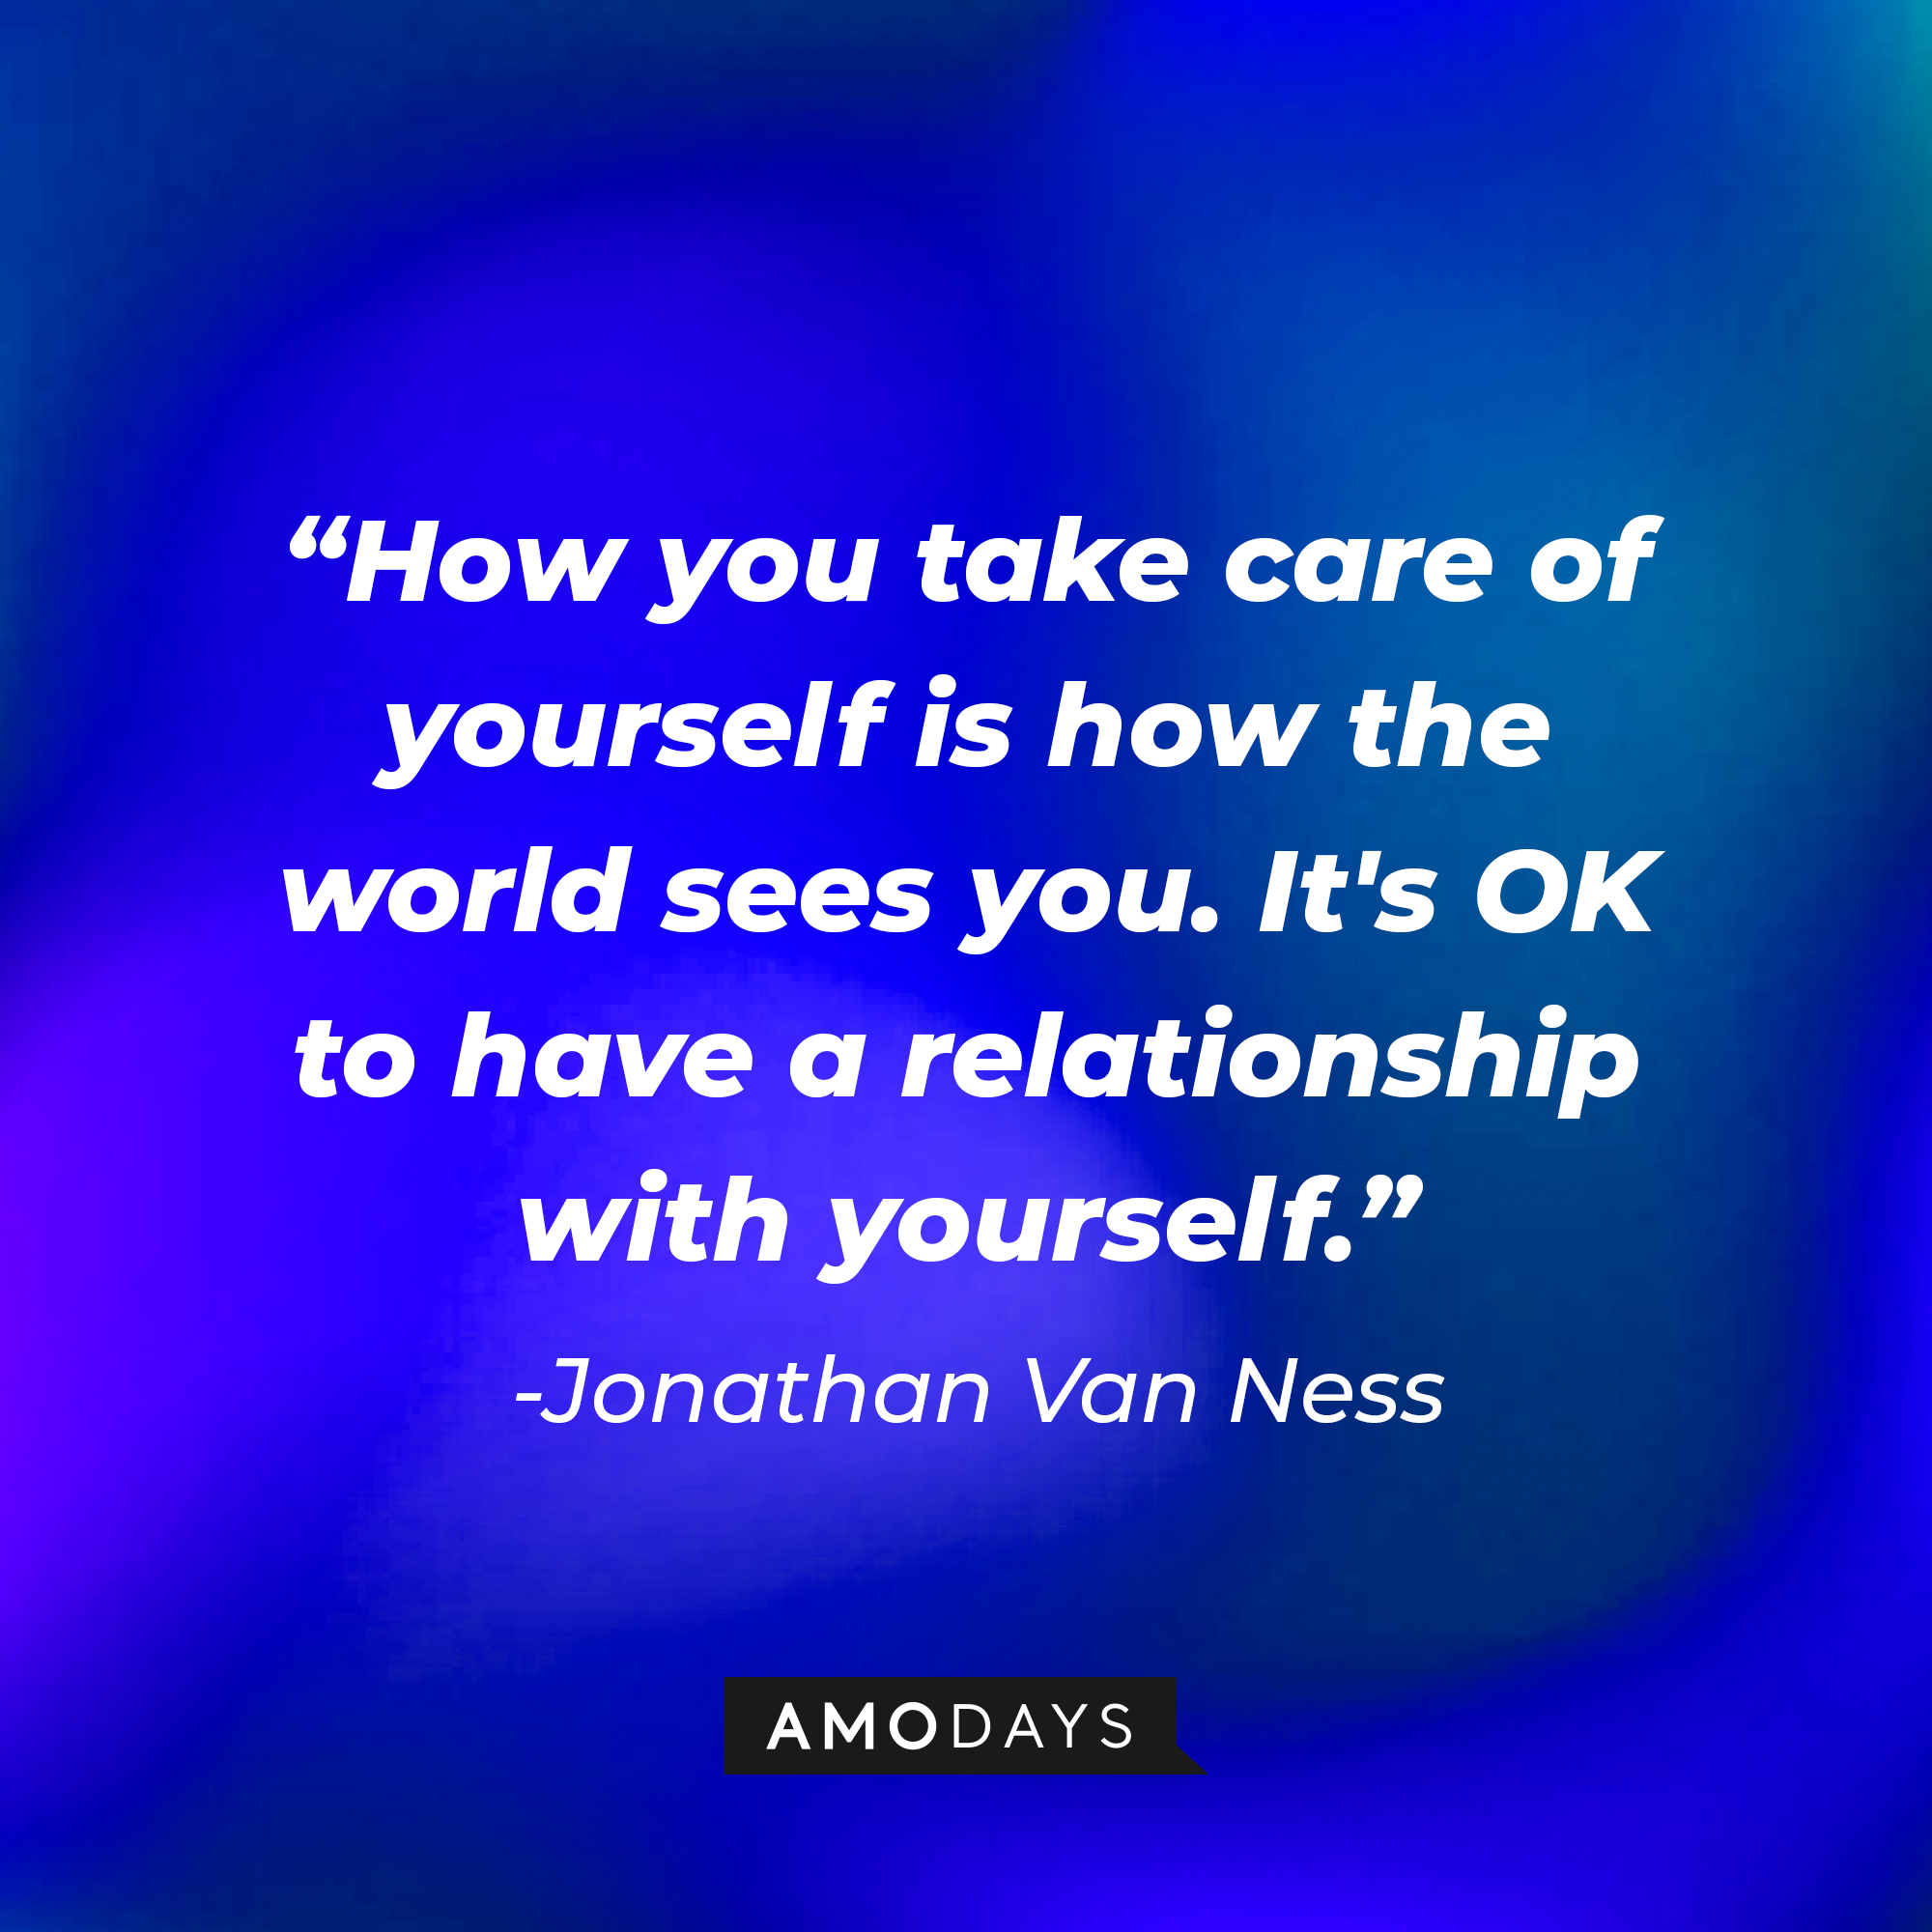 Jonathan Van Ness’ quote: "How you take care of yourself is how the world sees you. It's OK to have a relationship with yourself." | Image: AmoDays